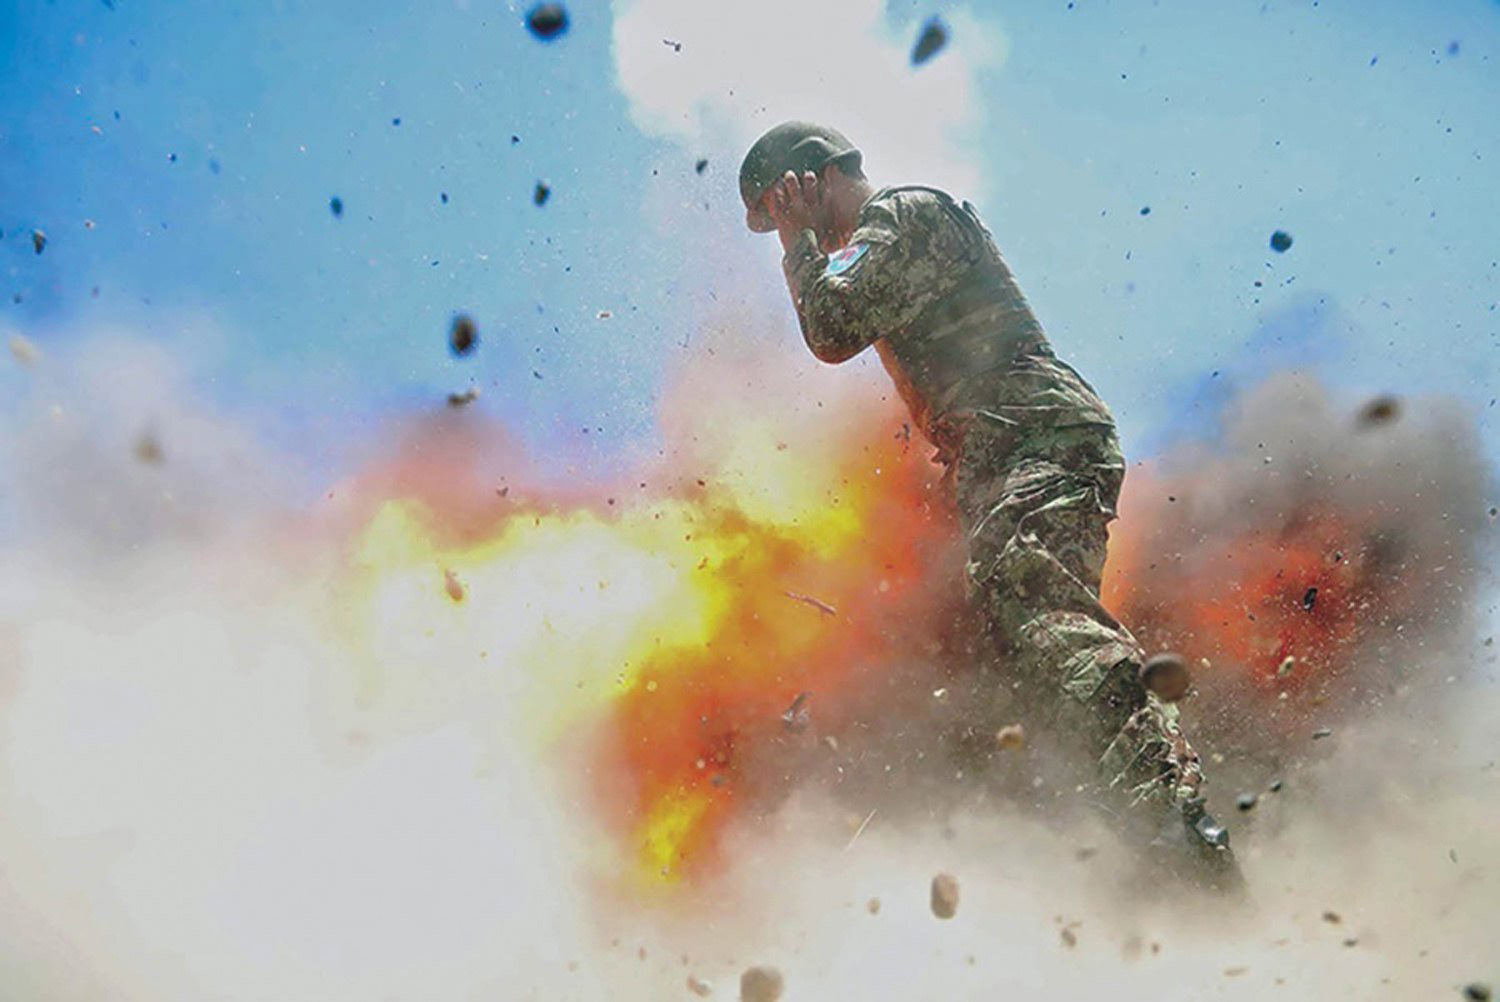 A mortar tube accidentally explodes during an Afghan National Army live-fire training exercise in Laghman province, Afghanistan, on July 2, 2013.